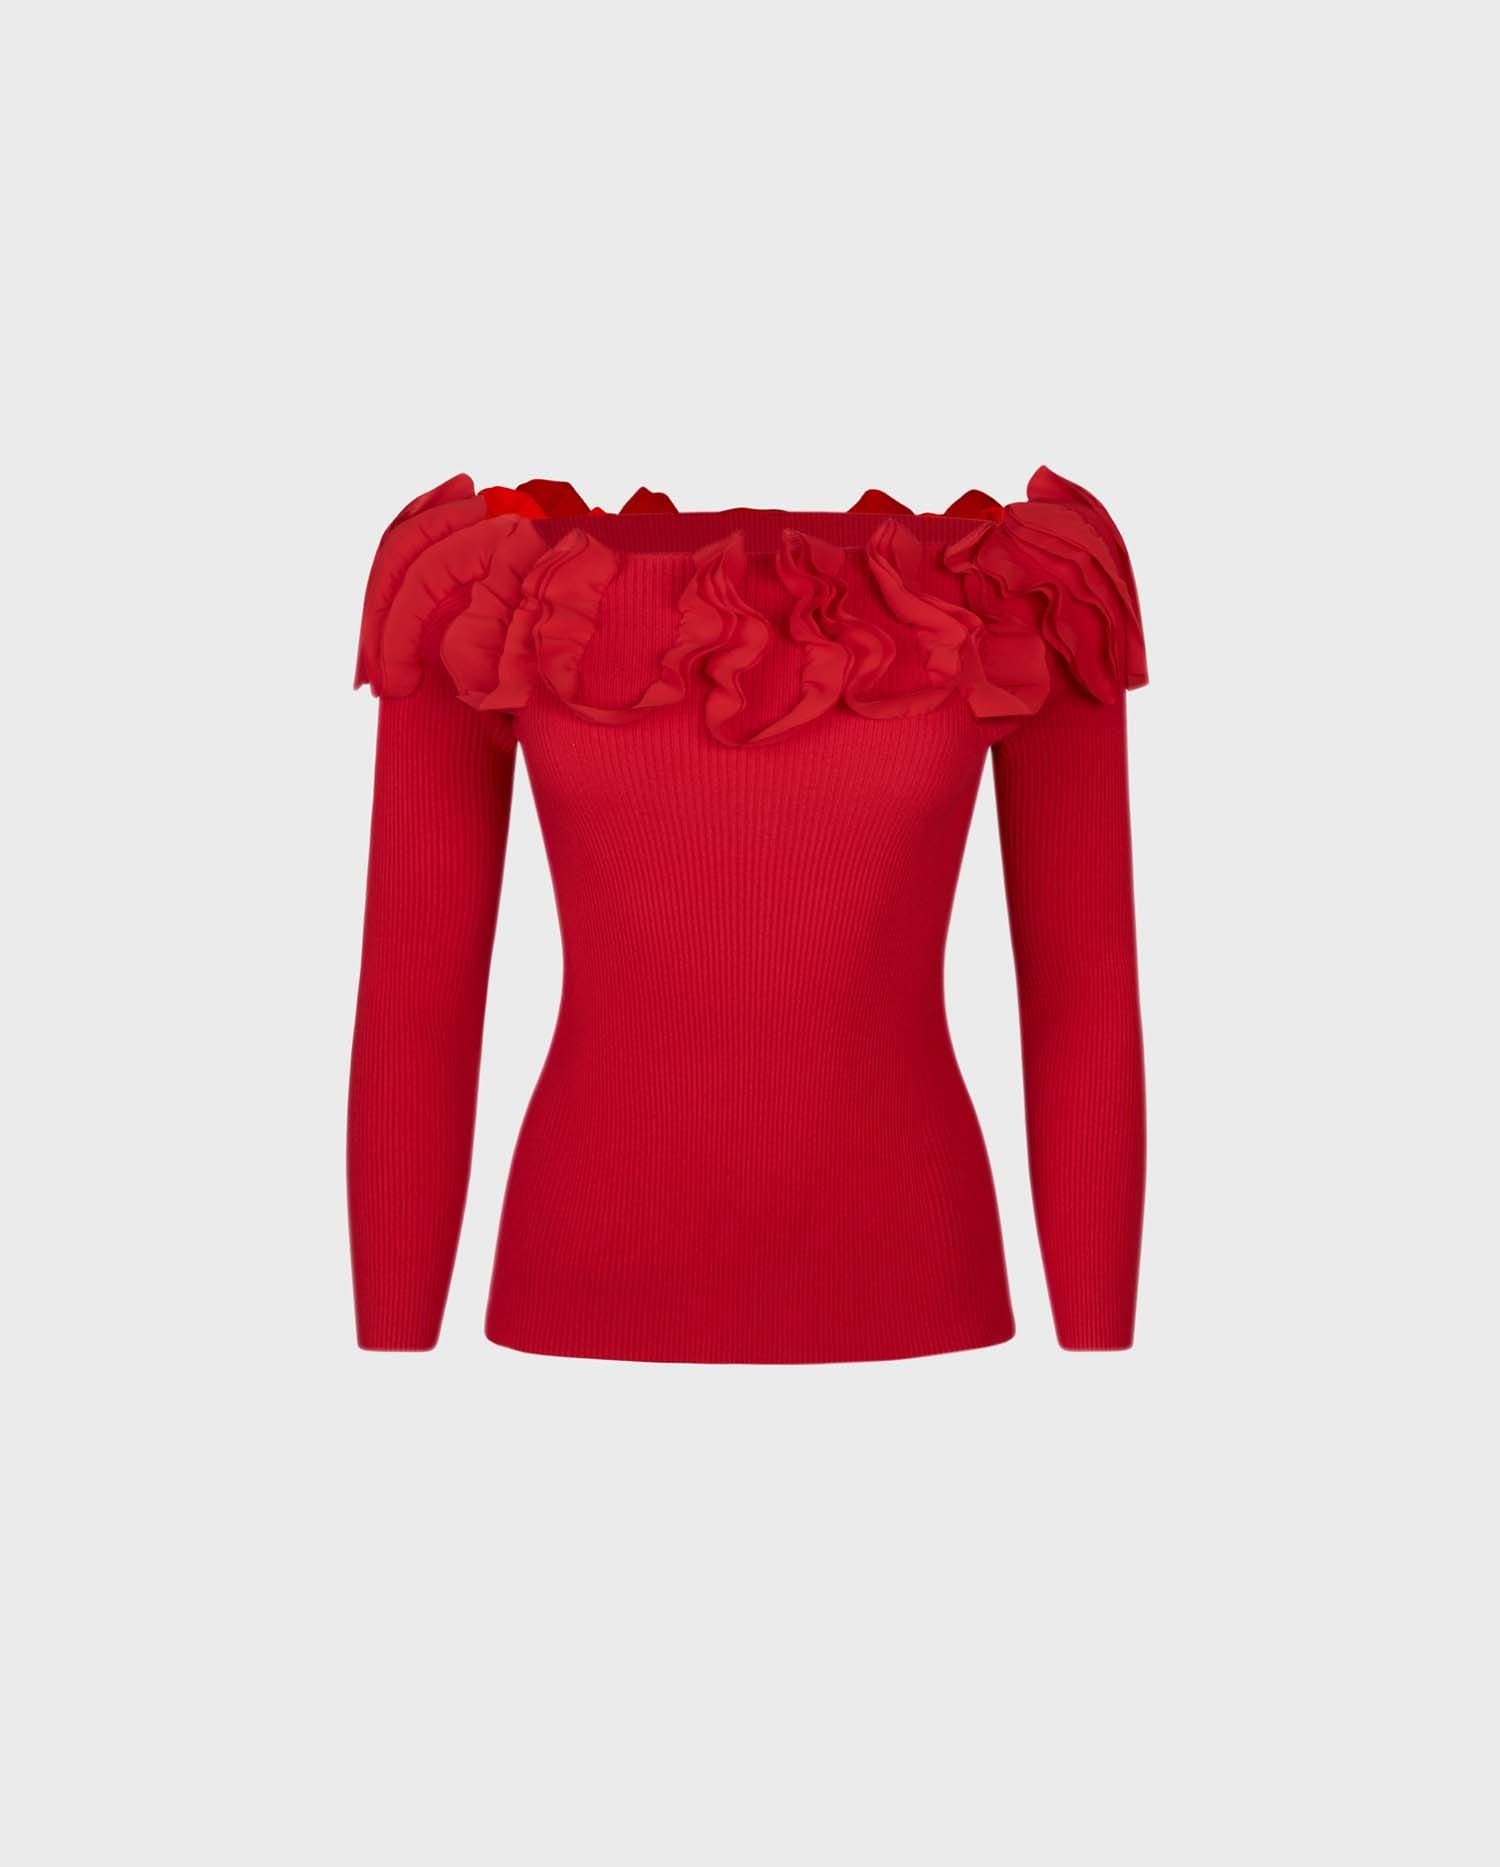 Discover The FEDA Long sleeve pullover knit in red with embellished ruffles from ANNE FONTAINE